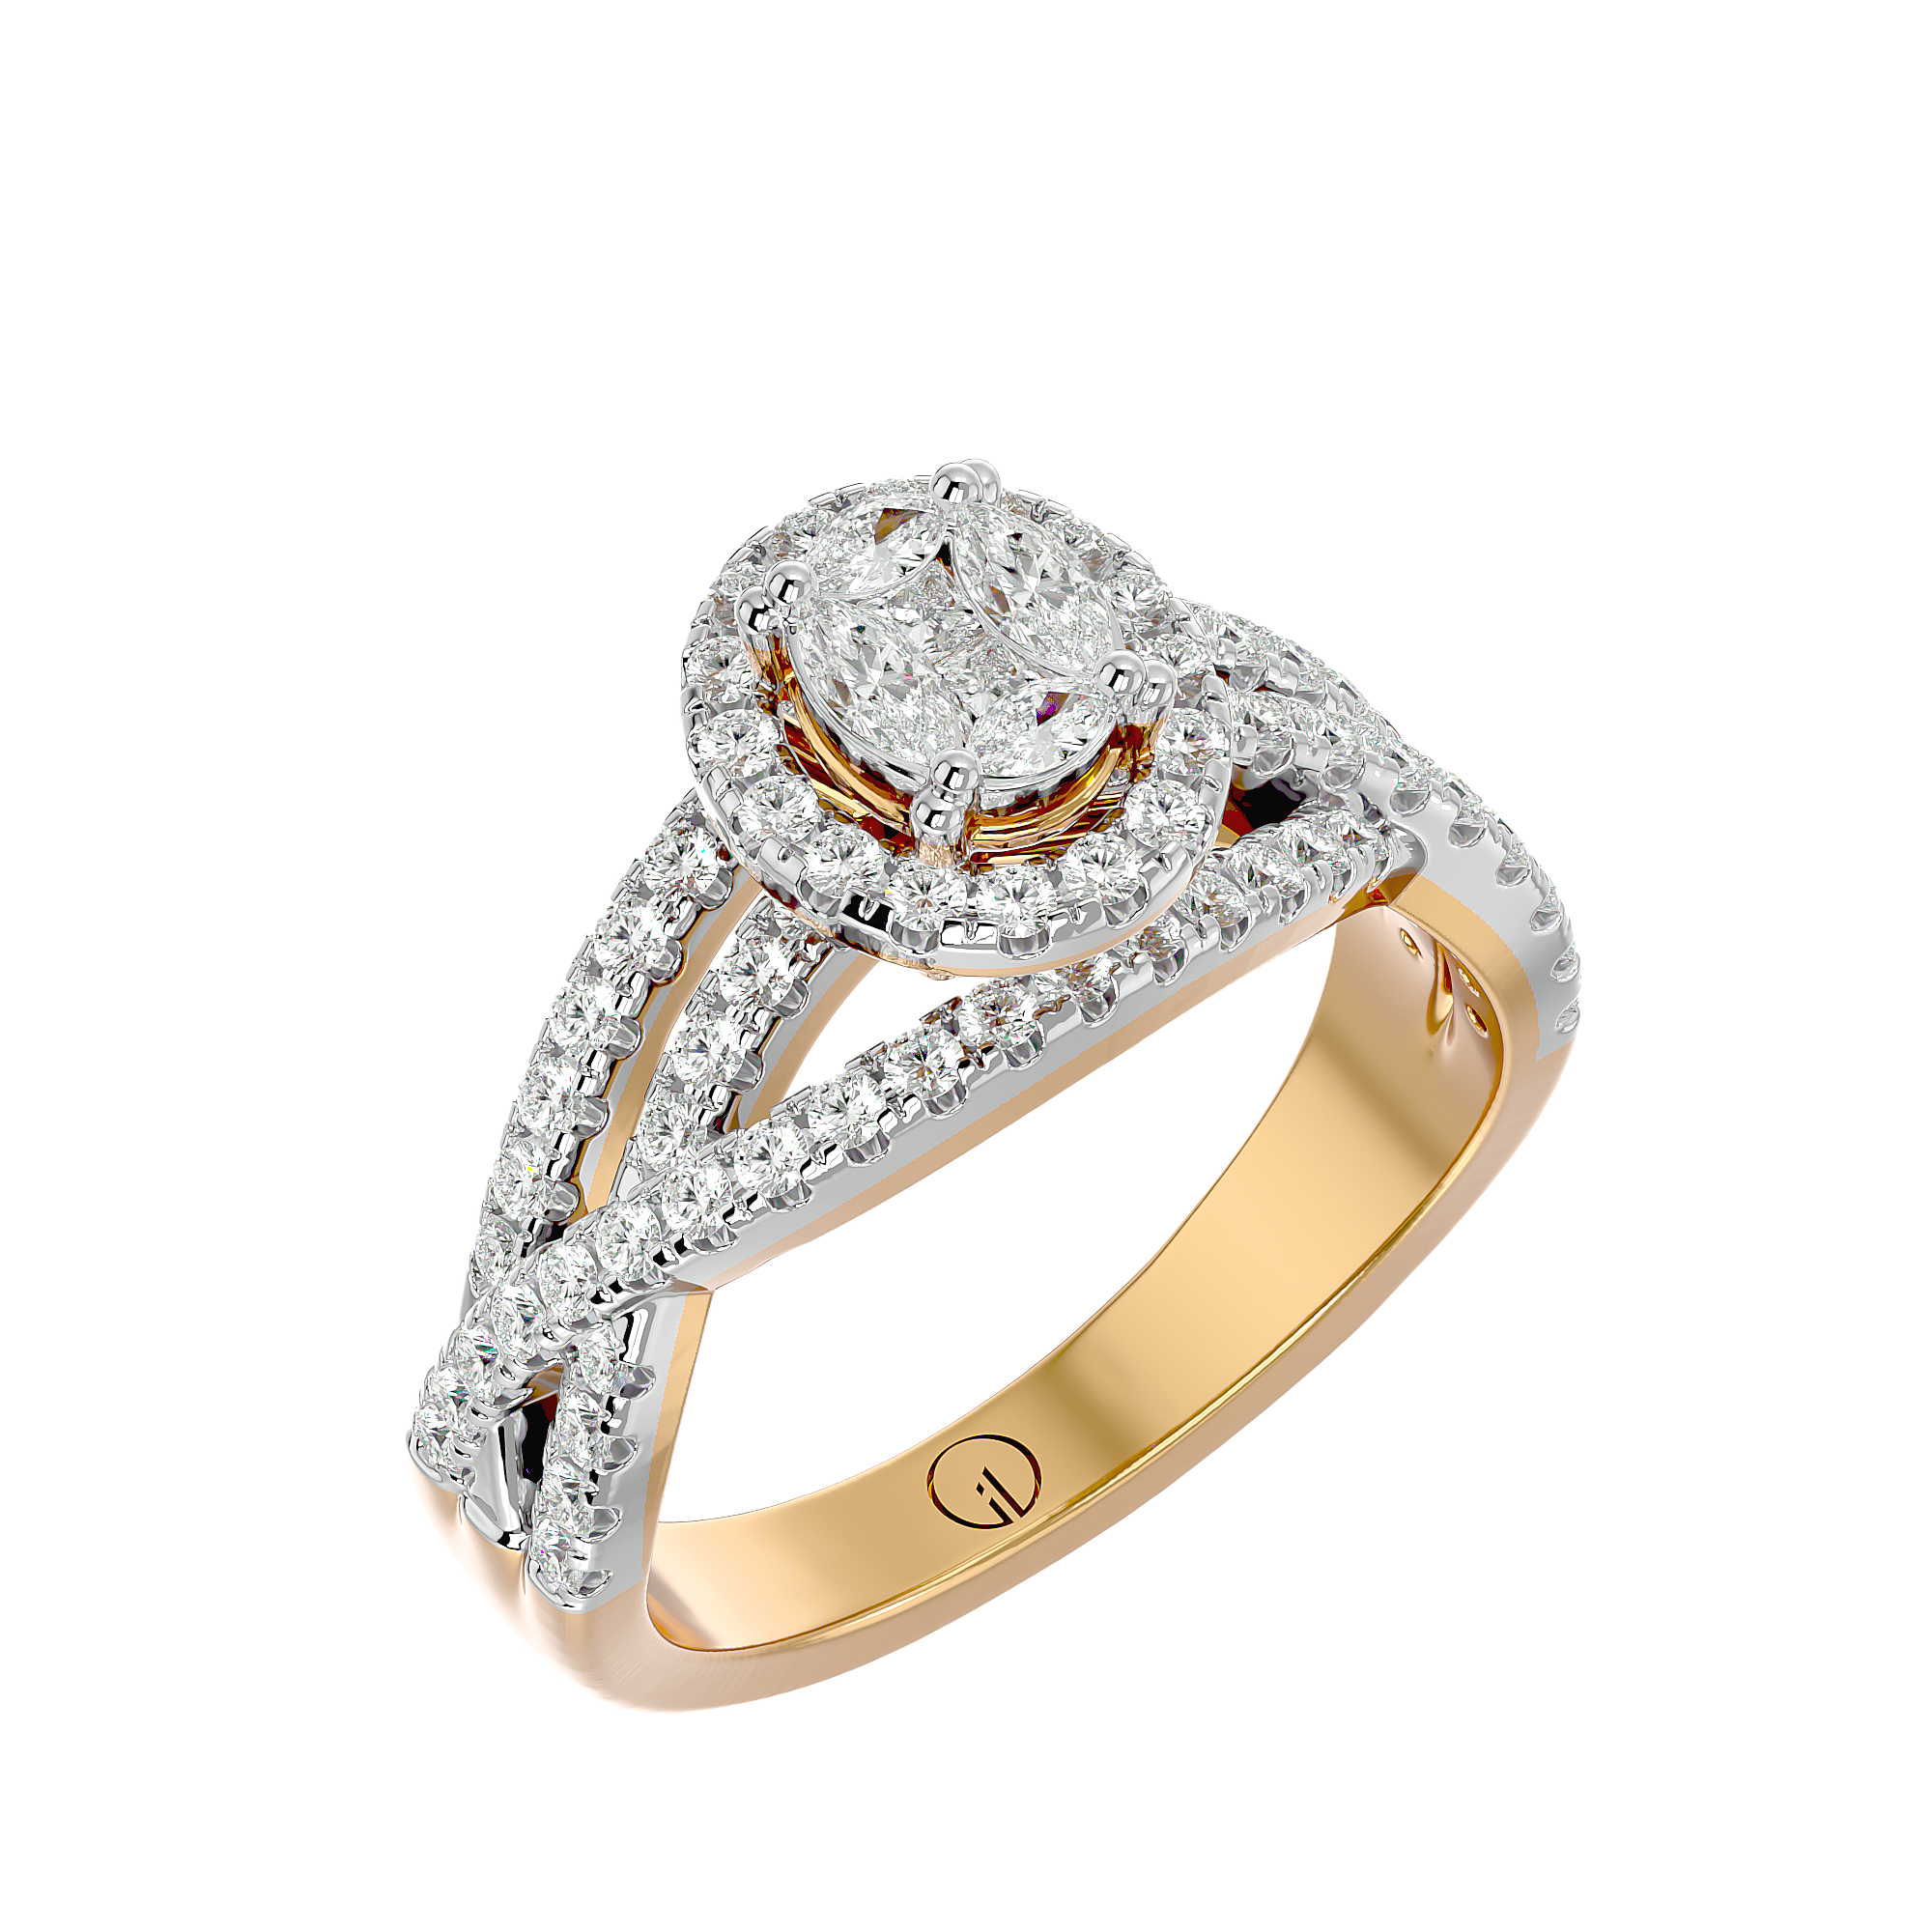 Ornate-Oval-Solitaire-Illusion-Diamond-Ring-RG2129C-View-01